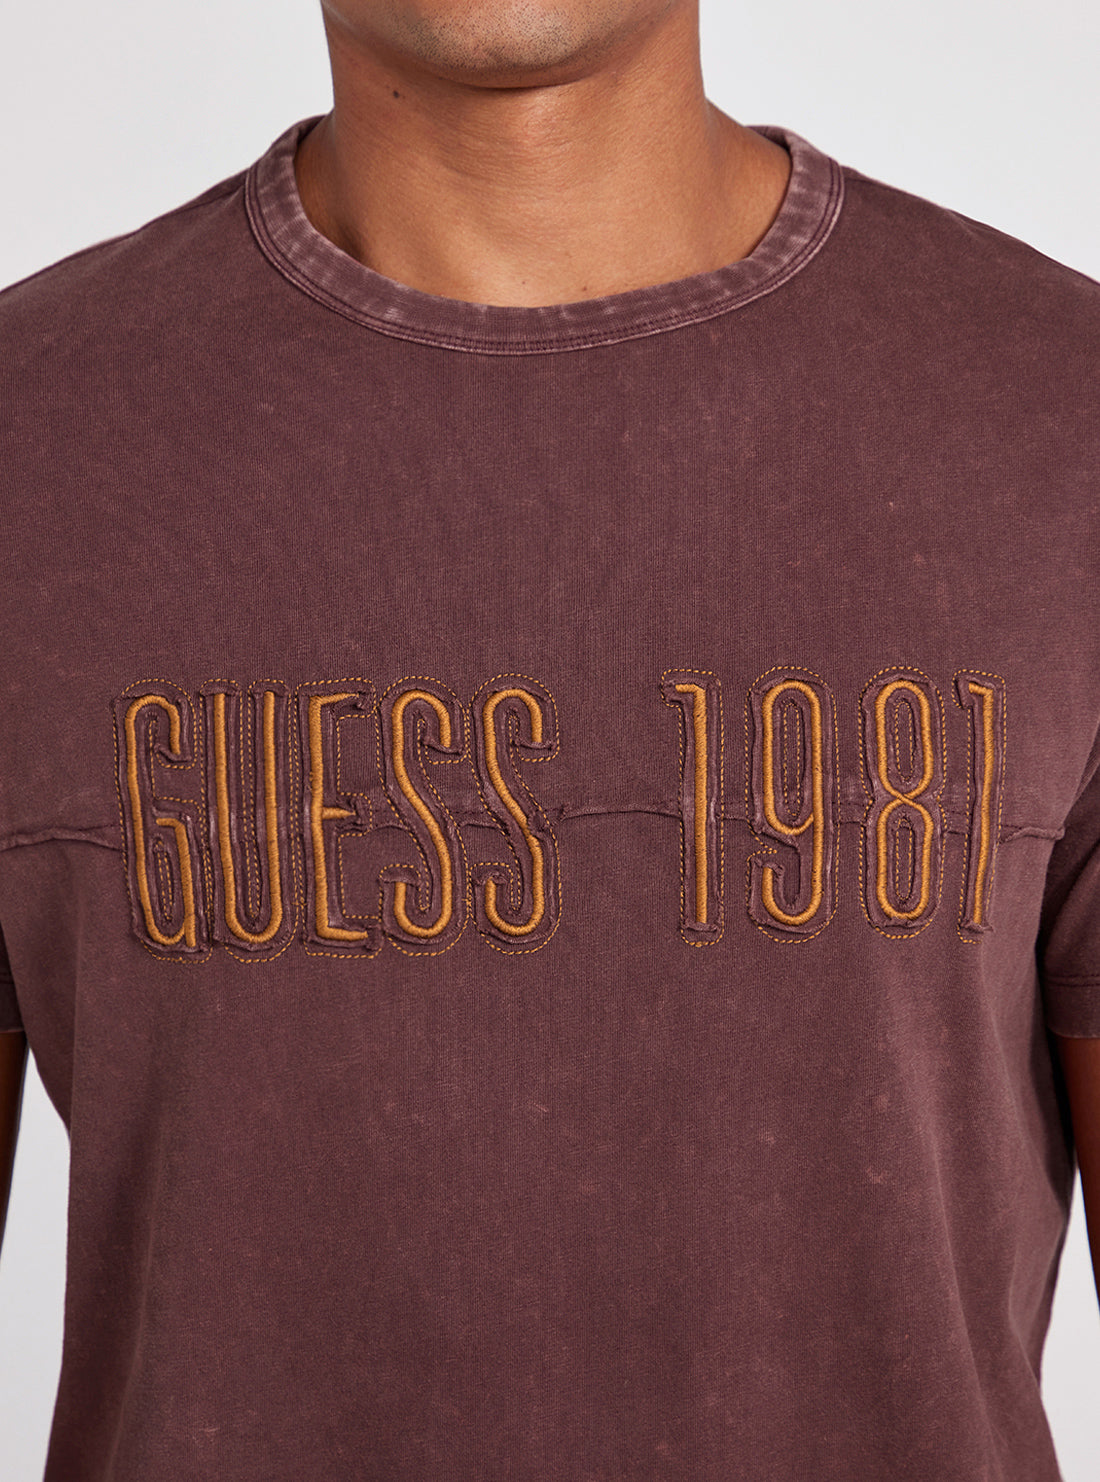 Maroon Embroidered Washed Logo T-Shirt | GUESS Men's apparel | detail view